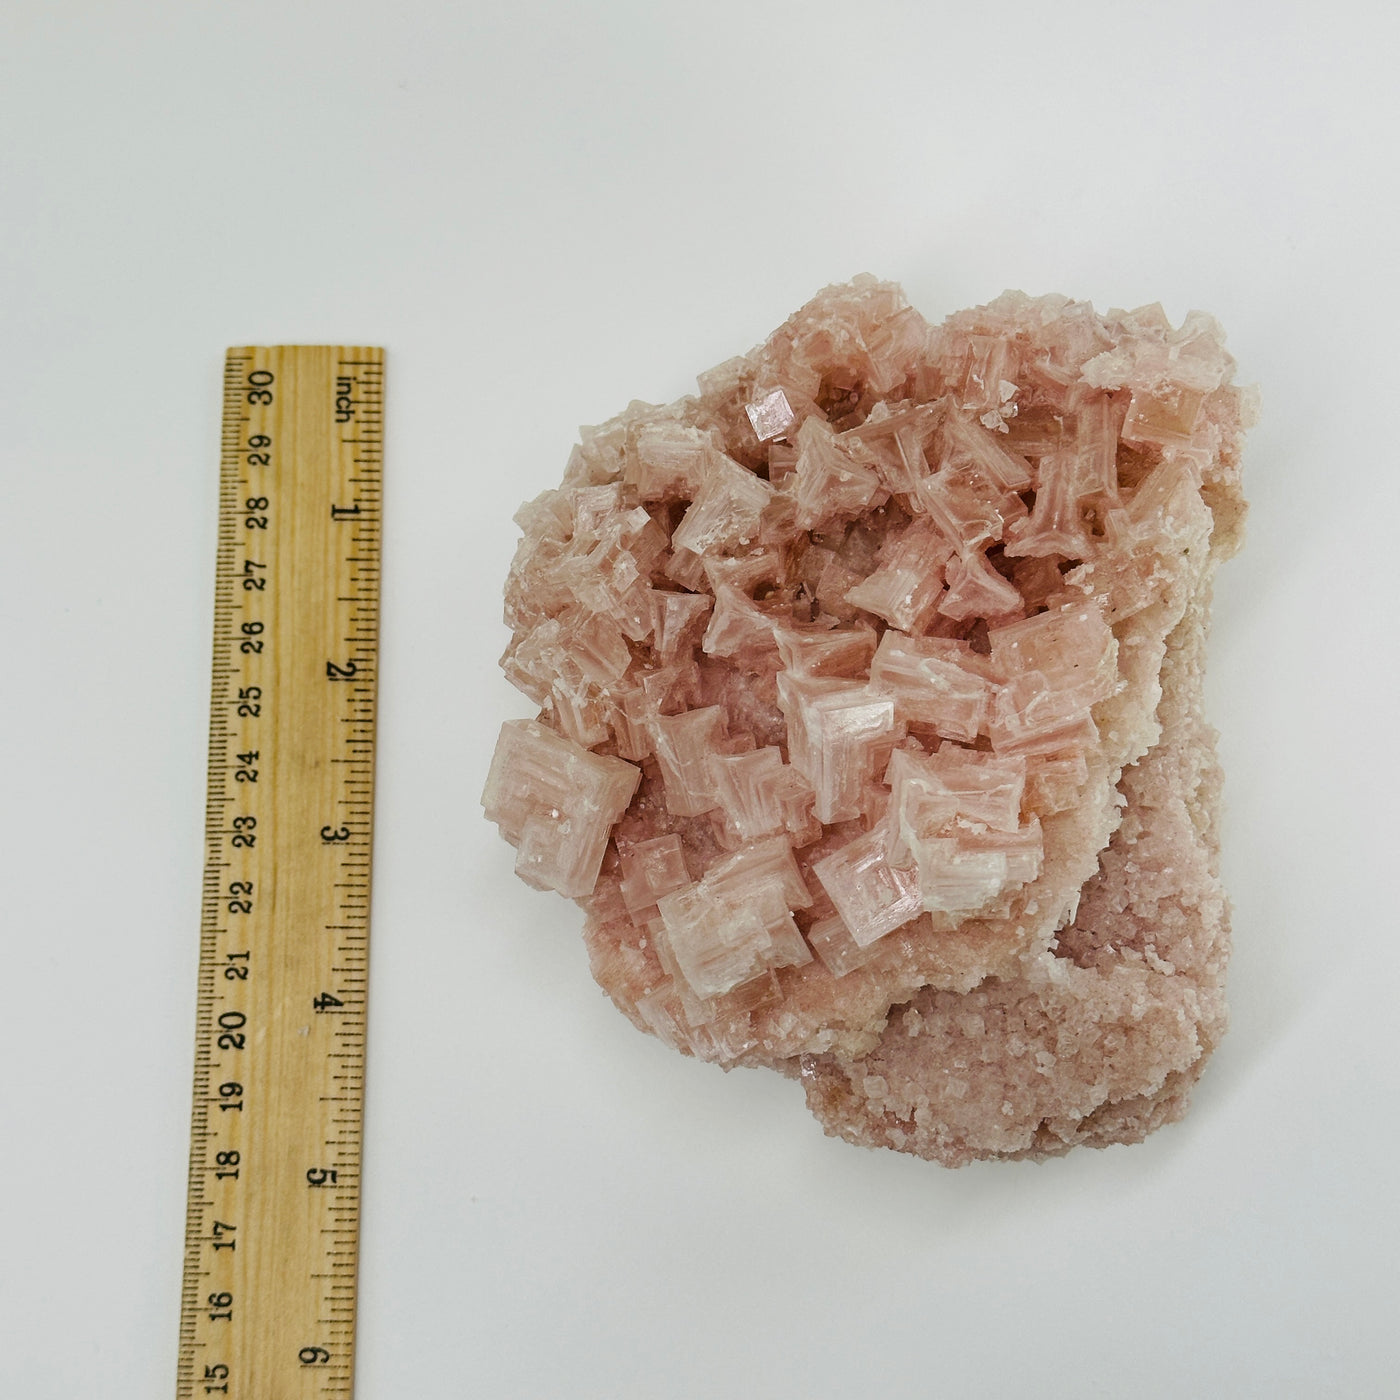 Pink halite next to a ruler for size reference